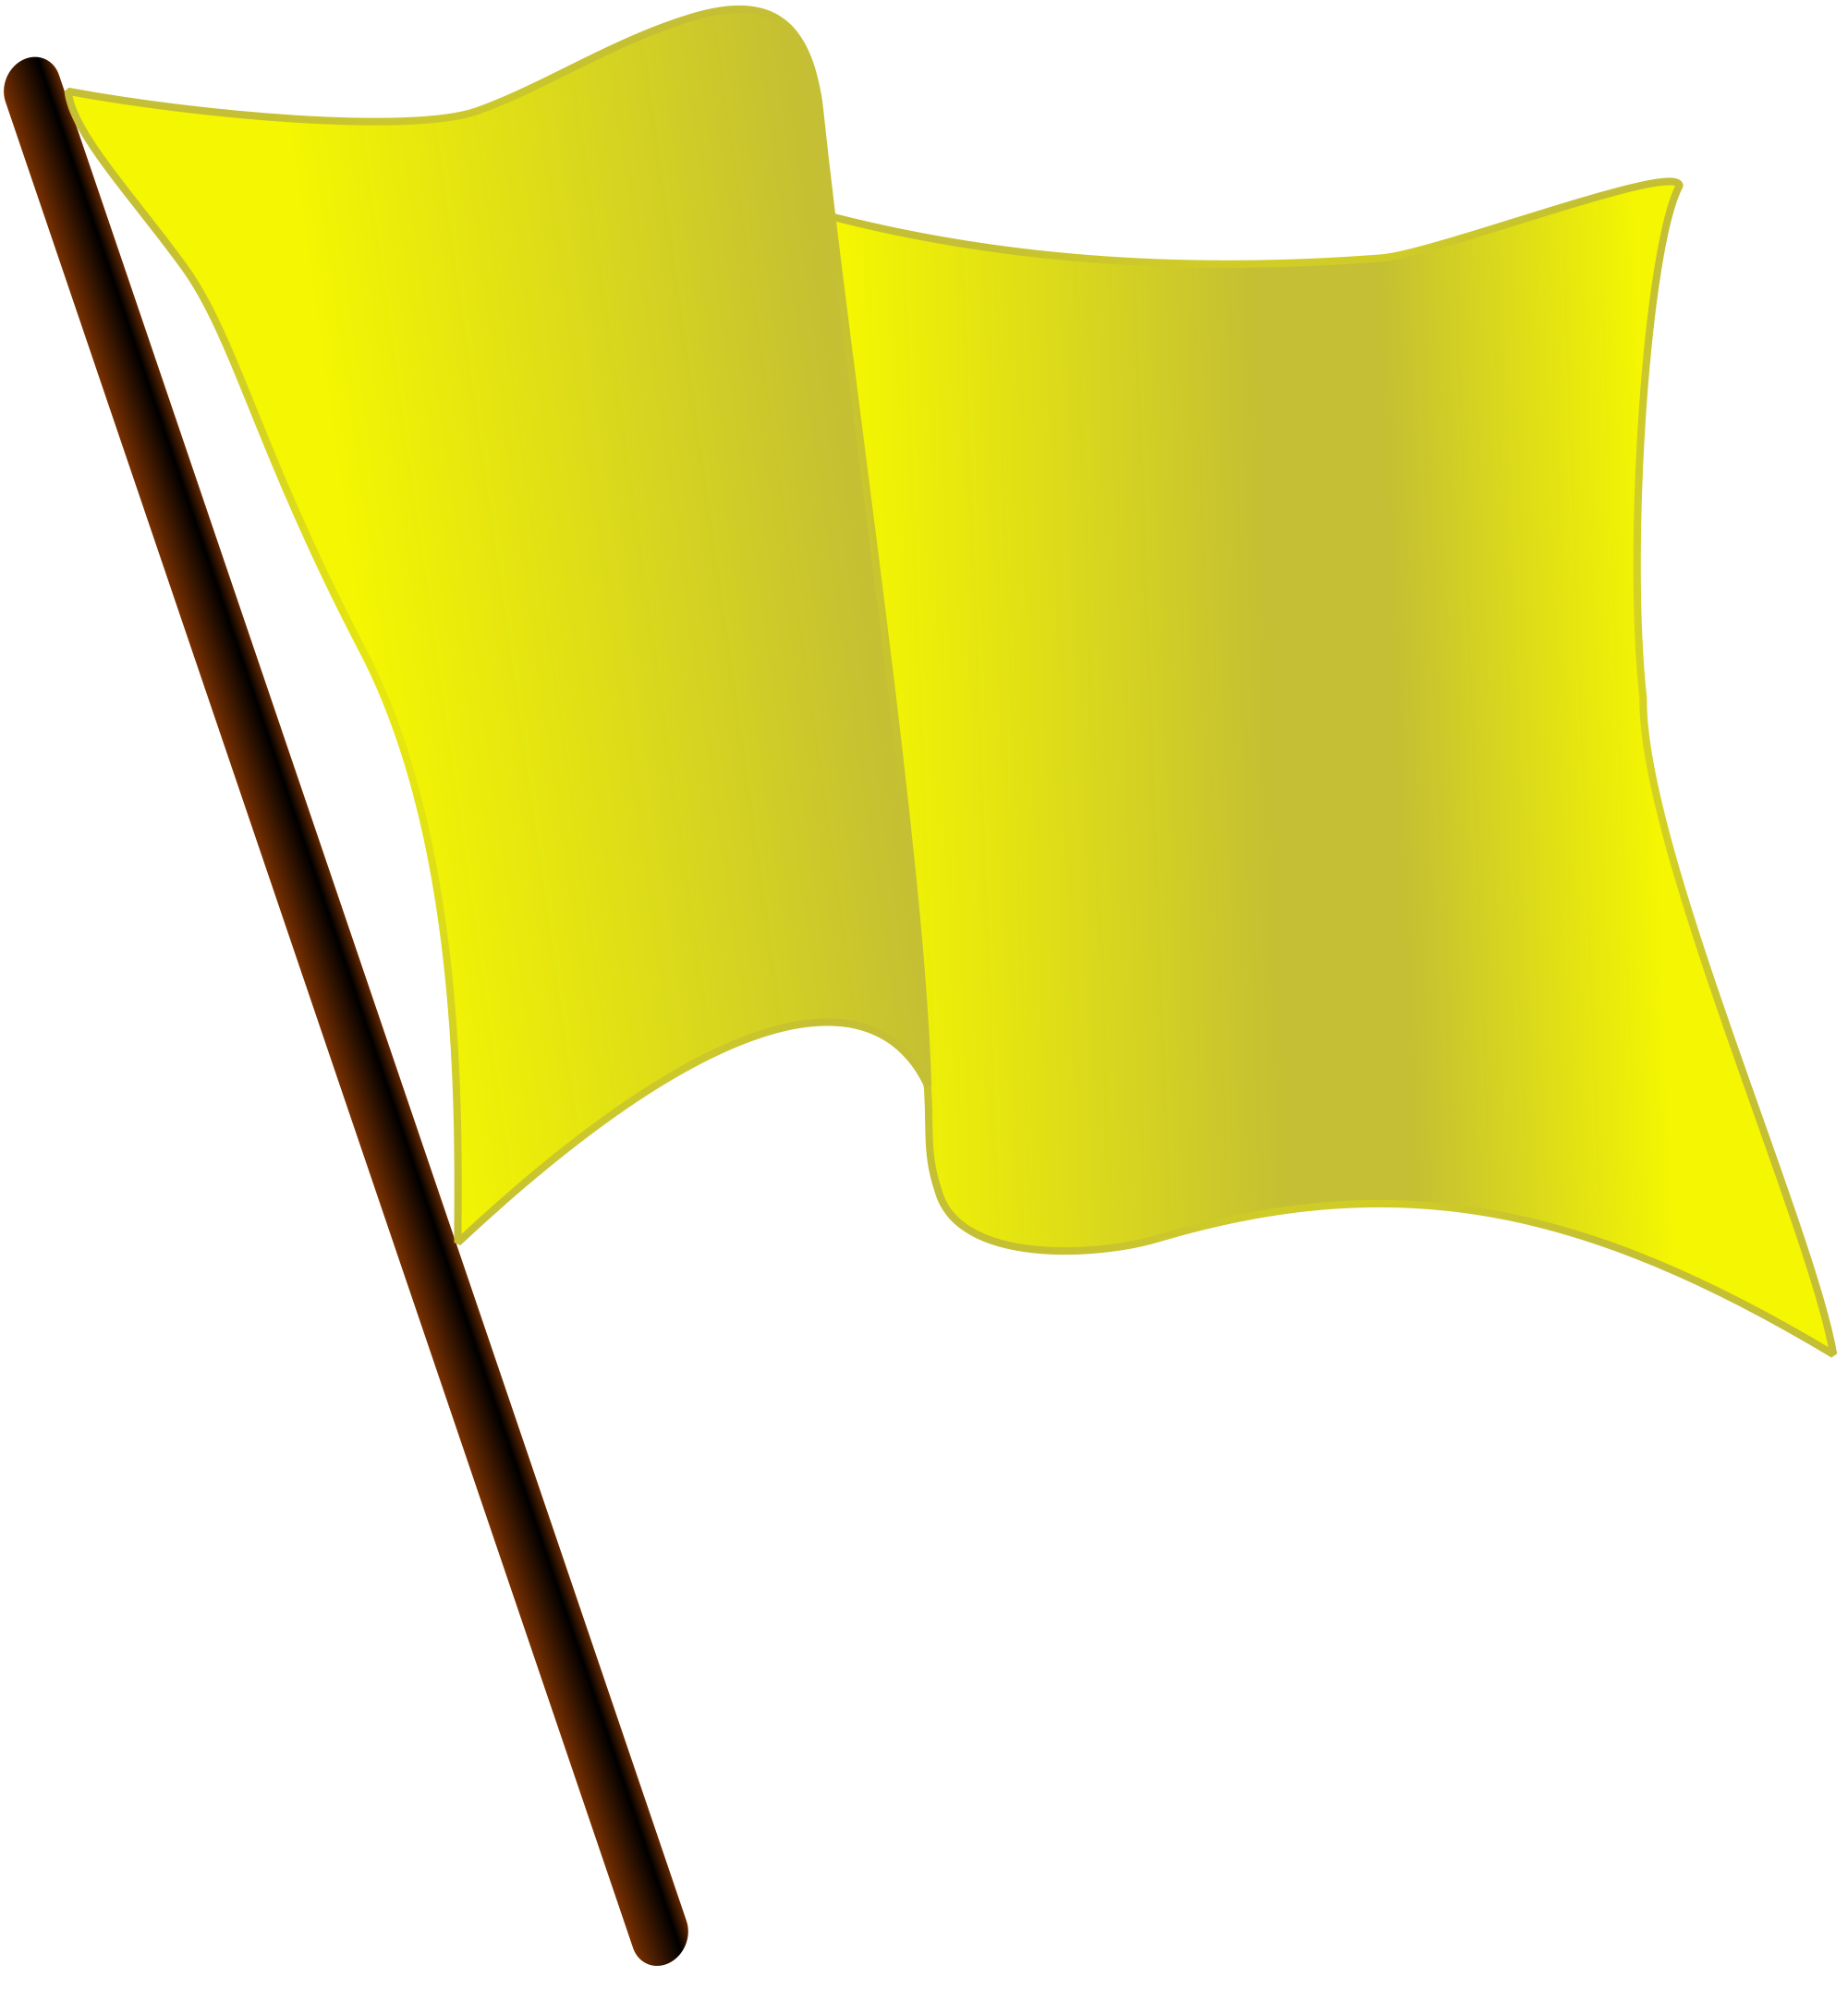 Flag clipart yellow, Flag yellow Transparent FREE for